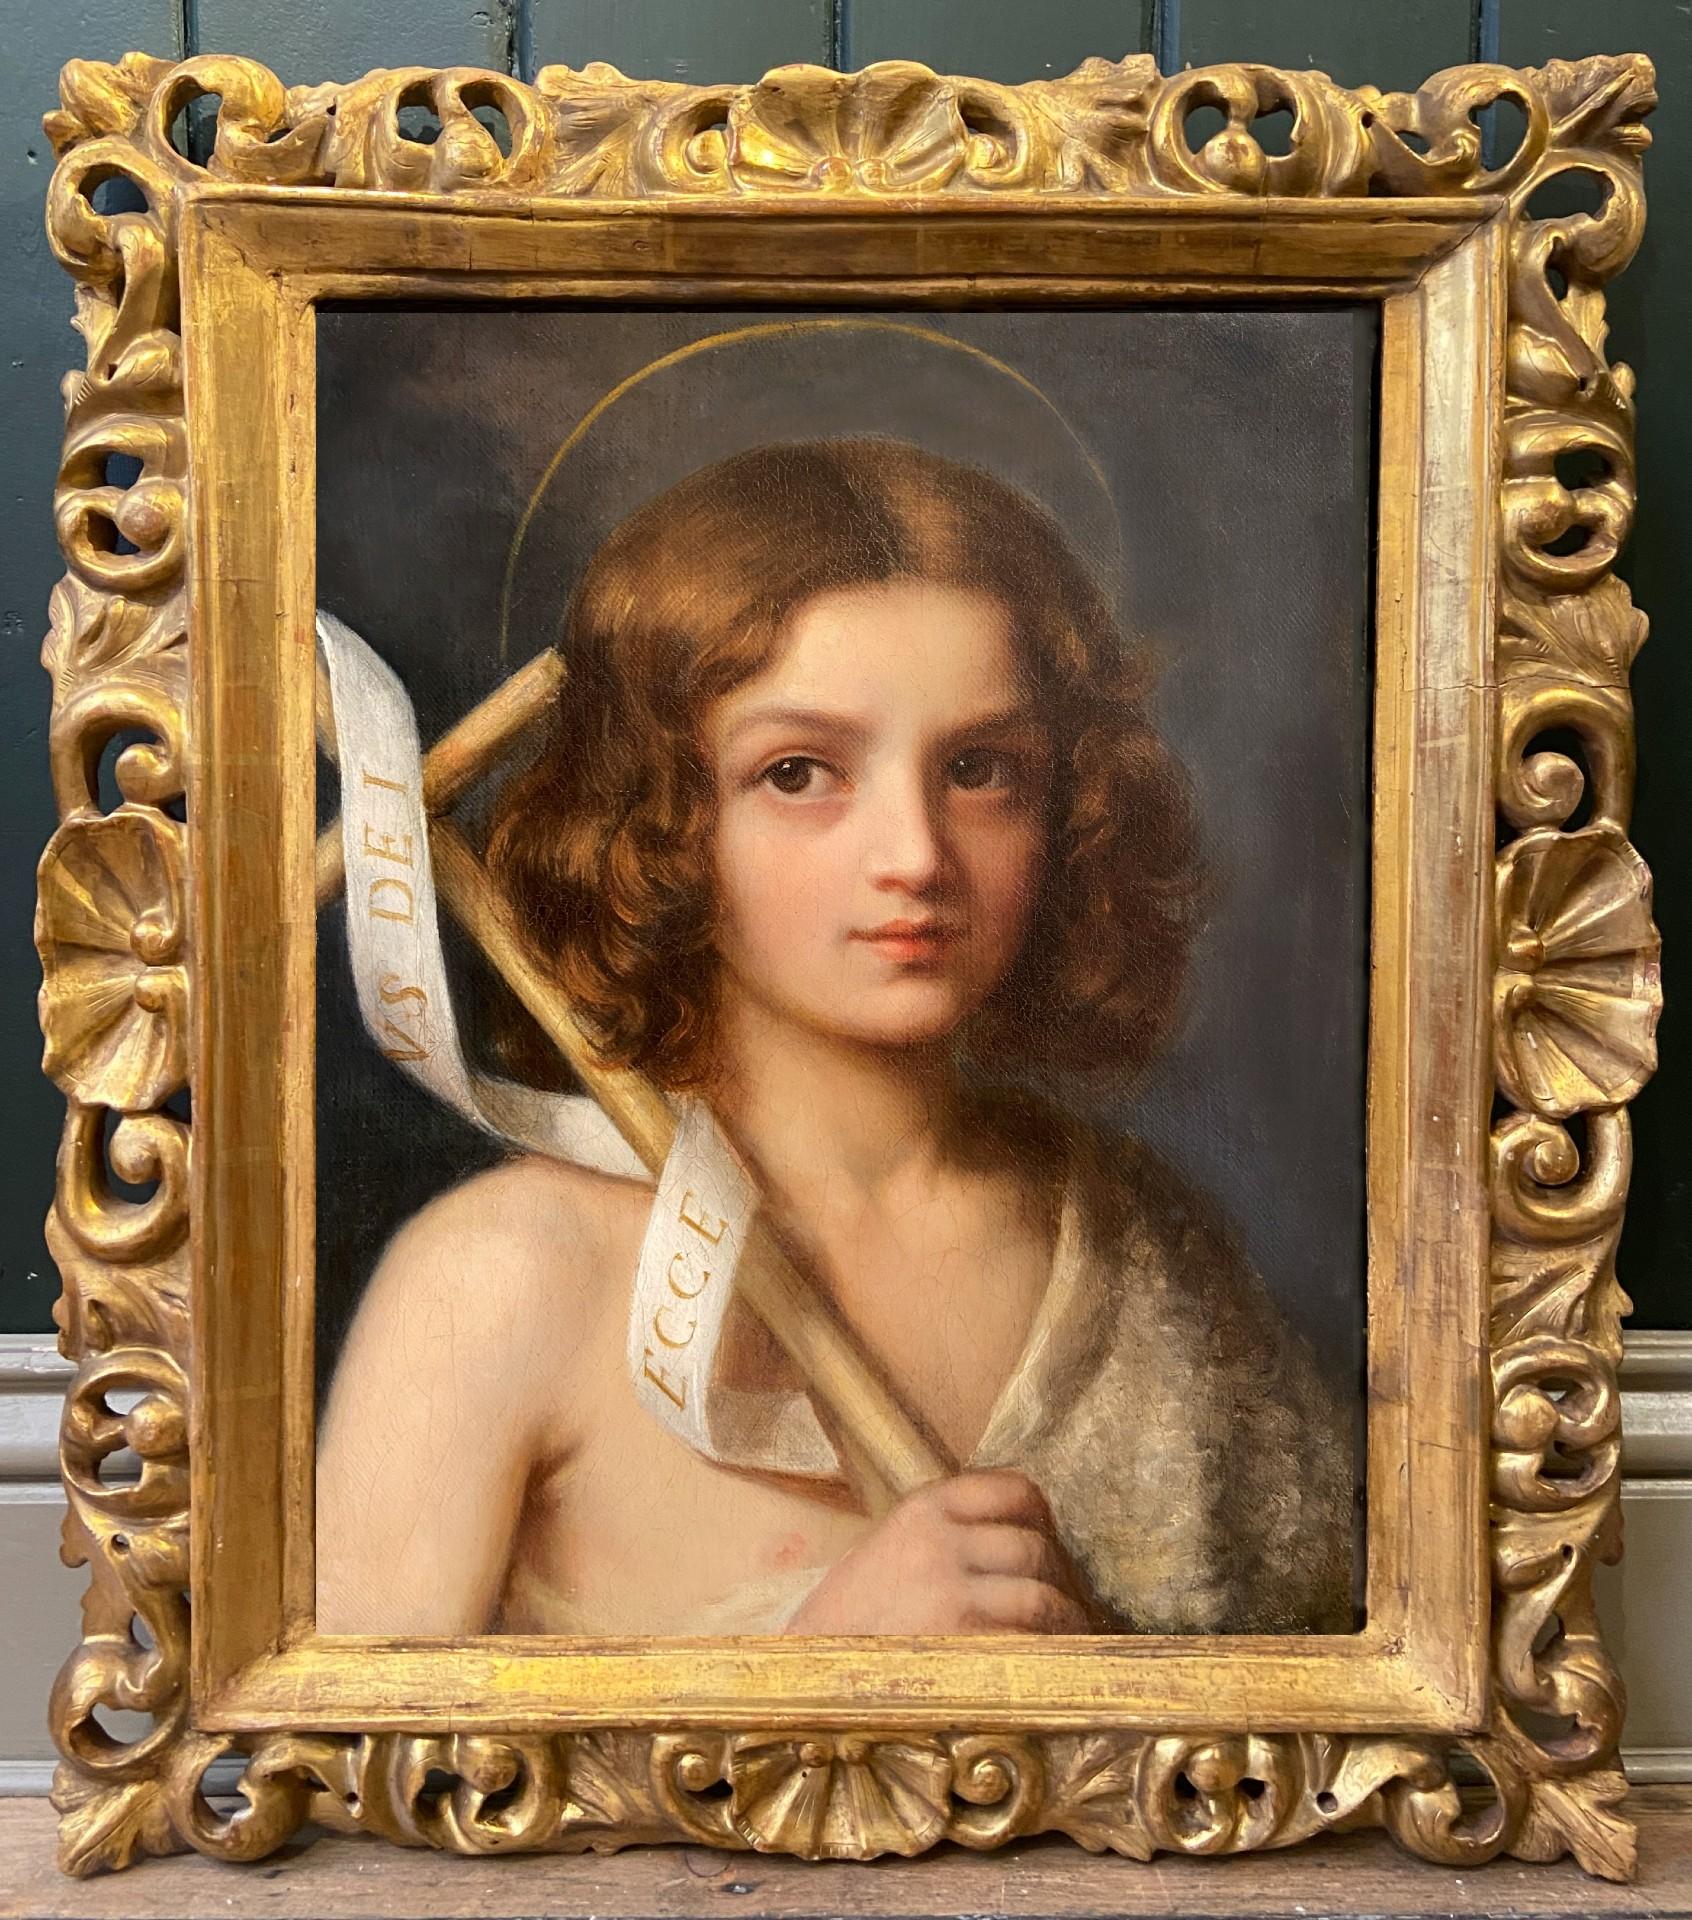 Oil on canvas
Image size: 15 x 19 inches (38 x 48.25 cm)
Handmade gilt pierced frame


This is a beautiful early 19th Century Italian Old Master oil painting with the subject matter of Saint John the Baptist as a very young child. The tender detail